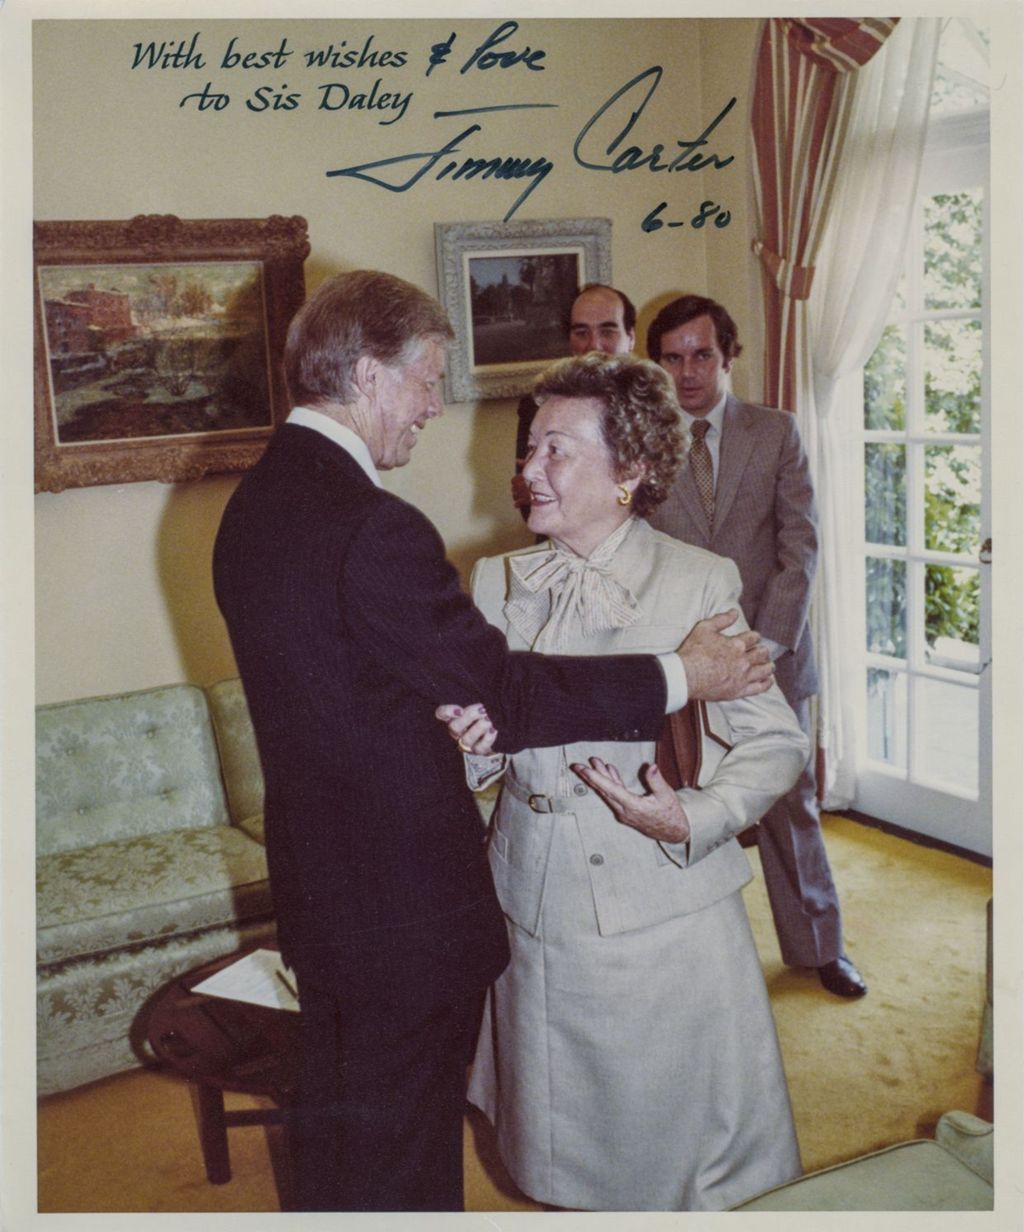 Miniature of Jimmy Carter with Eleanor Daley at the White House